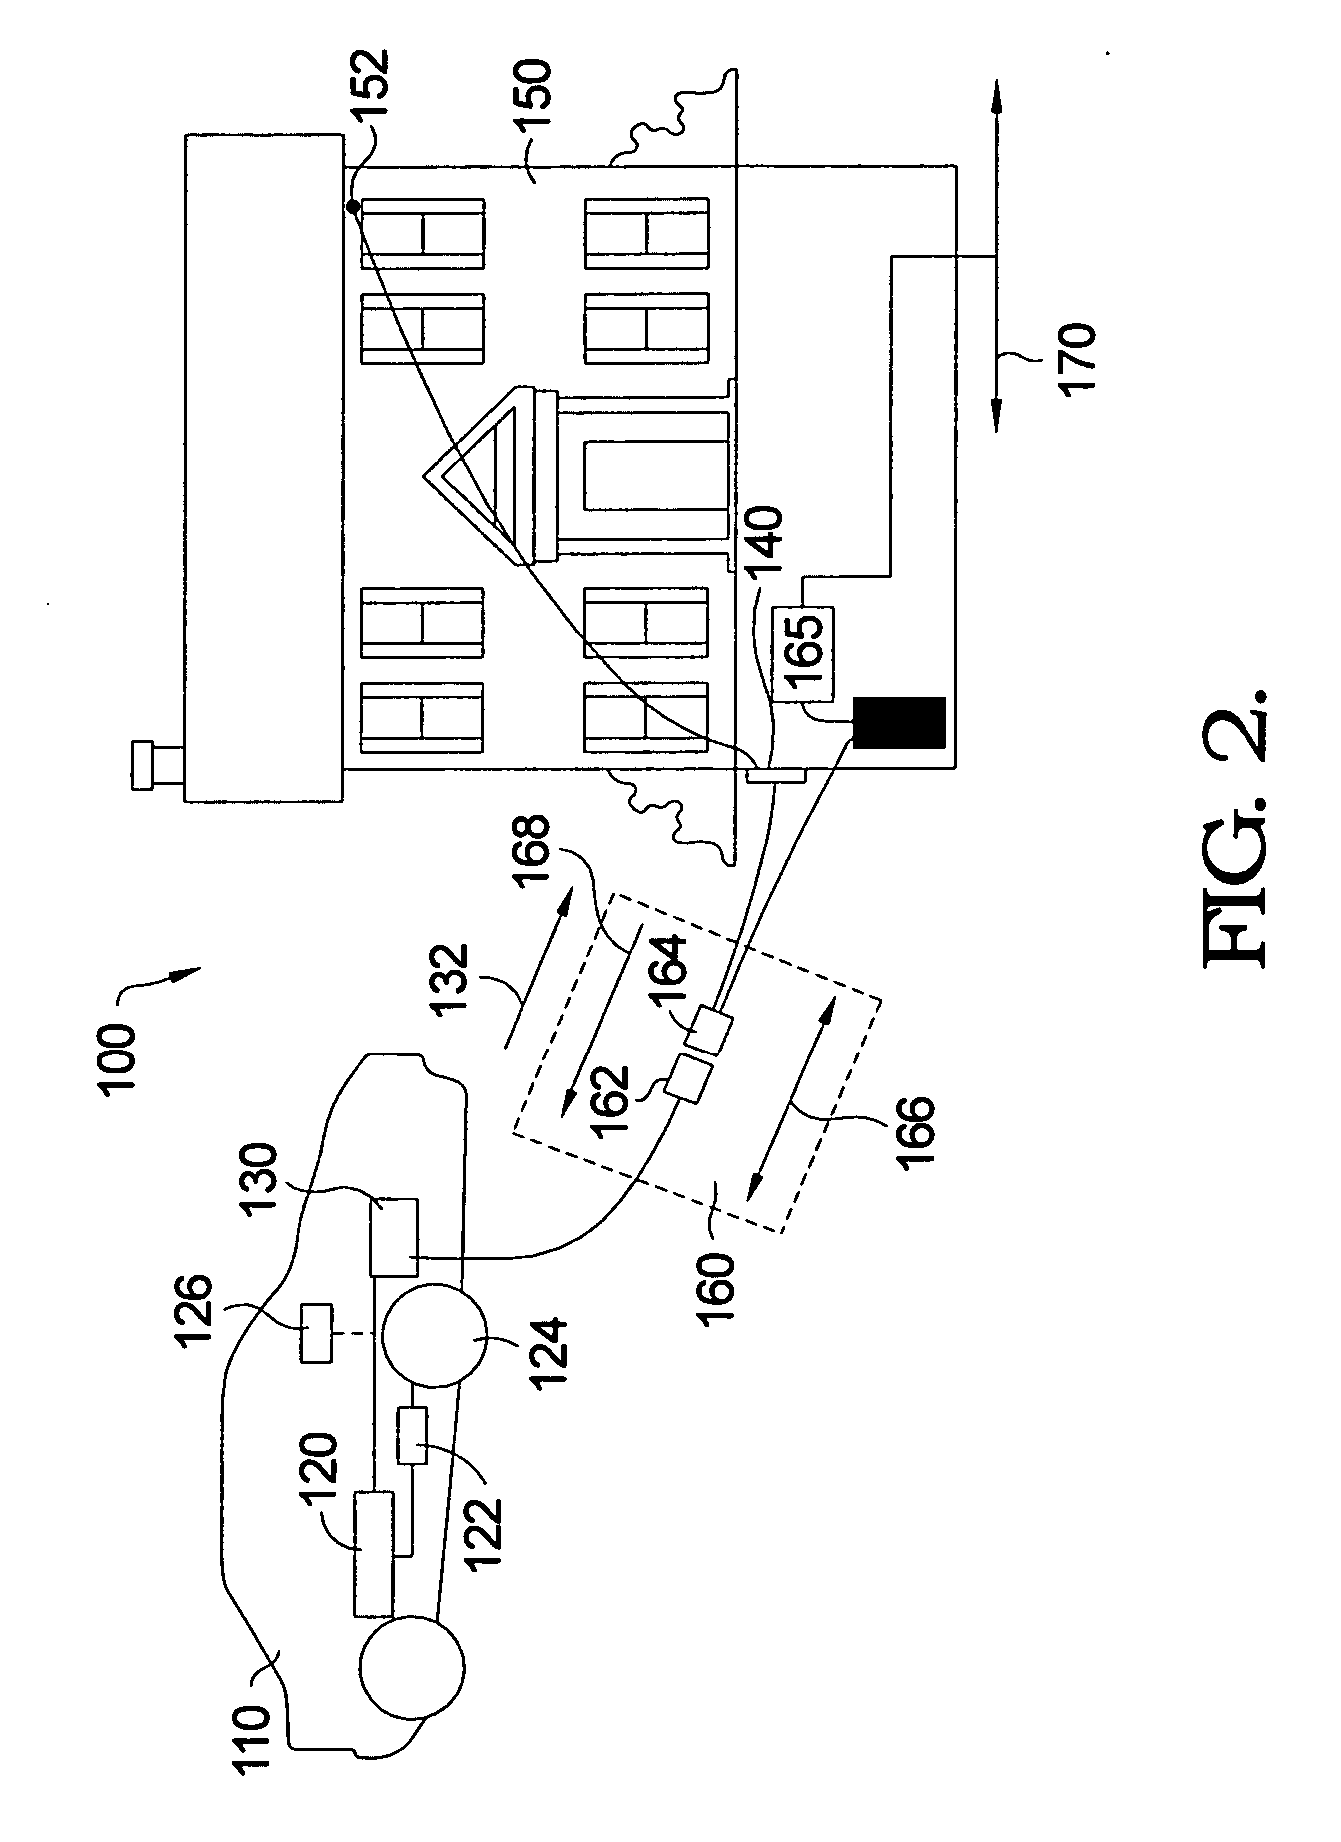 Fuel cell system using external heat sources for maintaining internal temperature